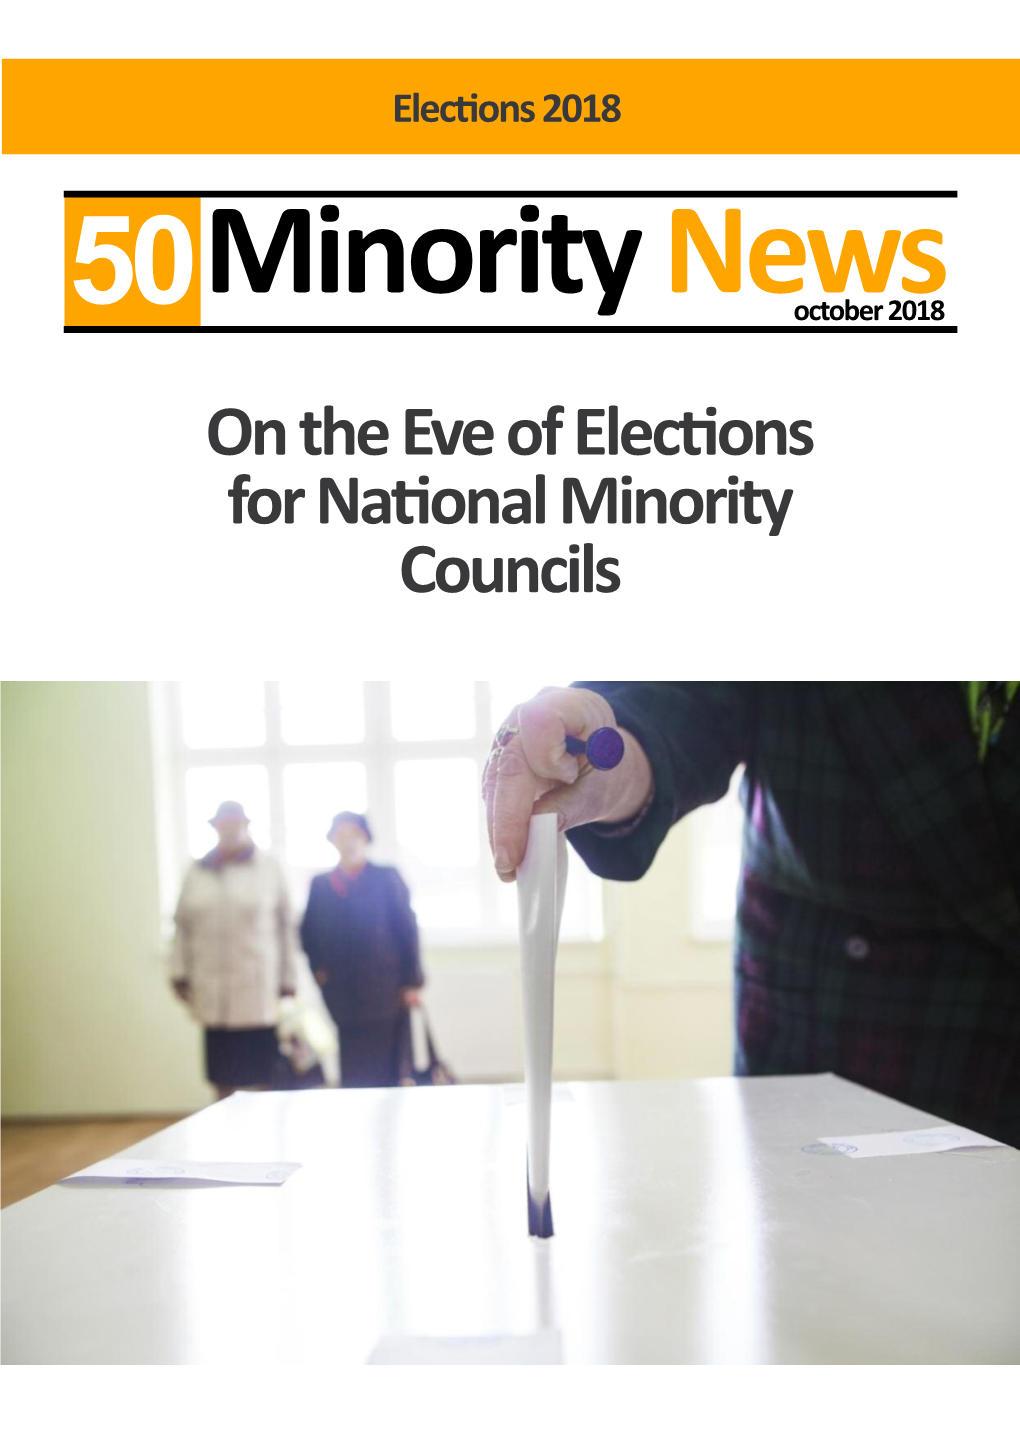 On the Eve of Elections for National Minority Councils CONTENT EDITORIAL 50